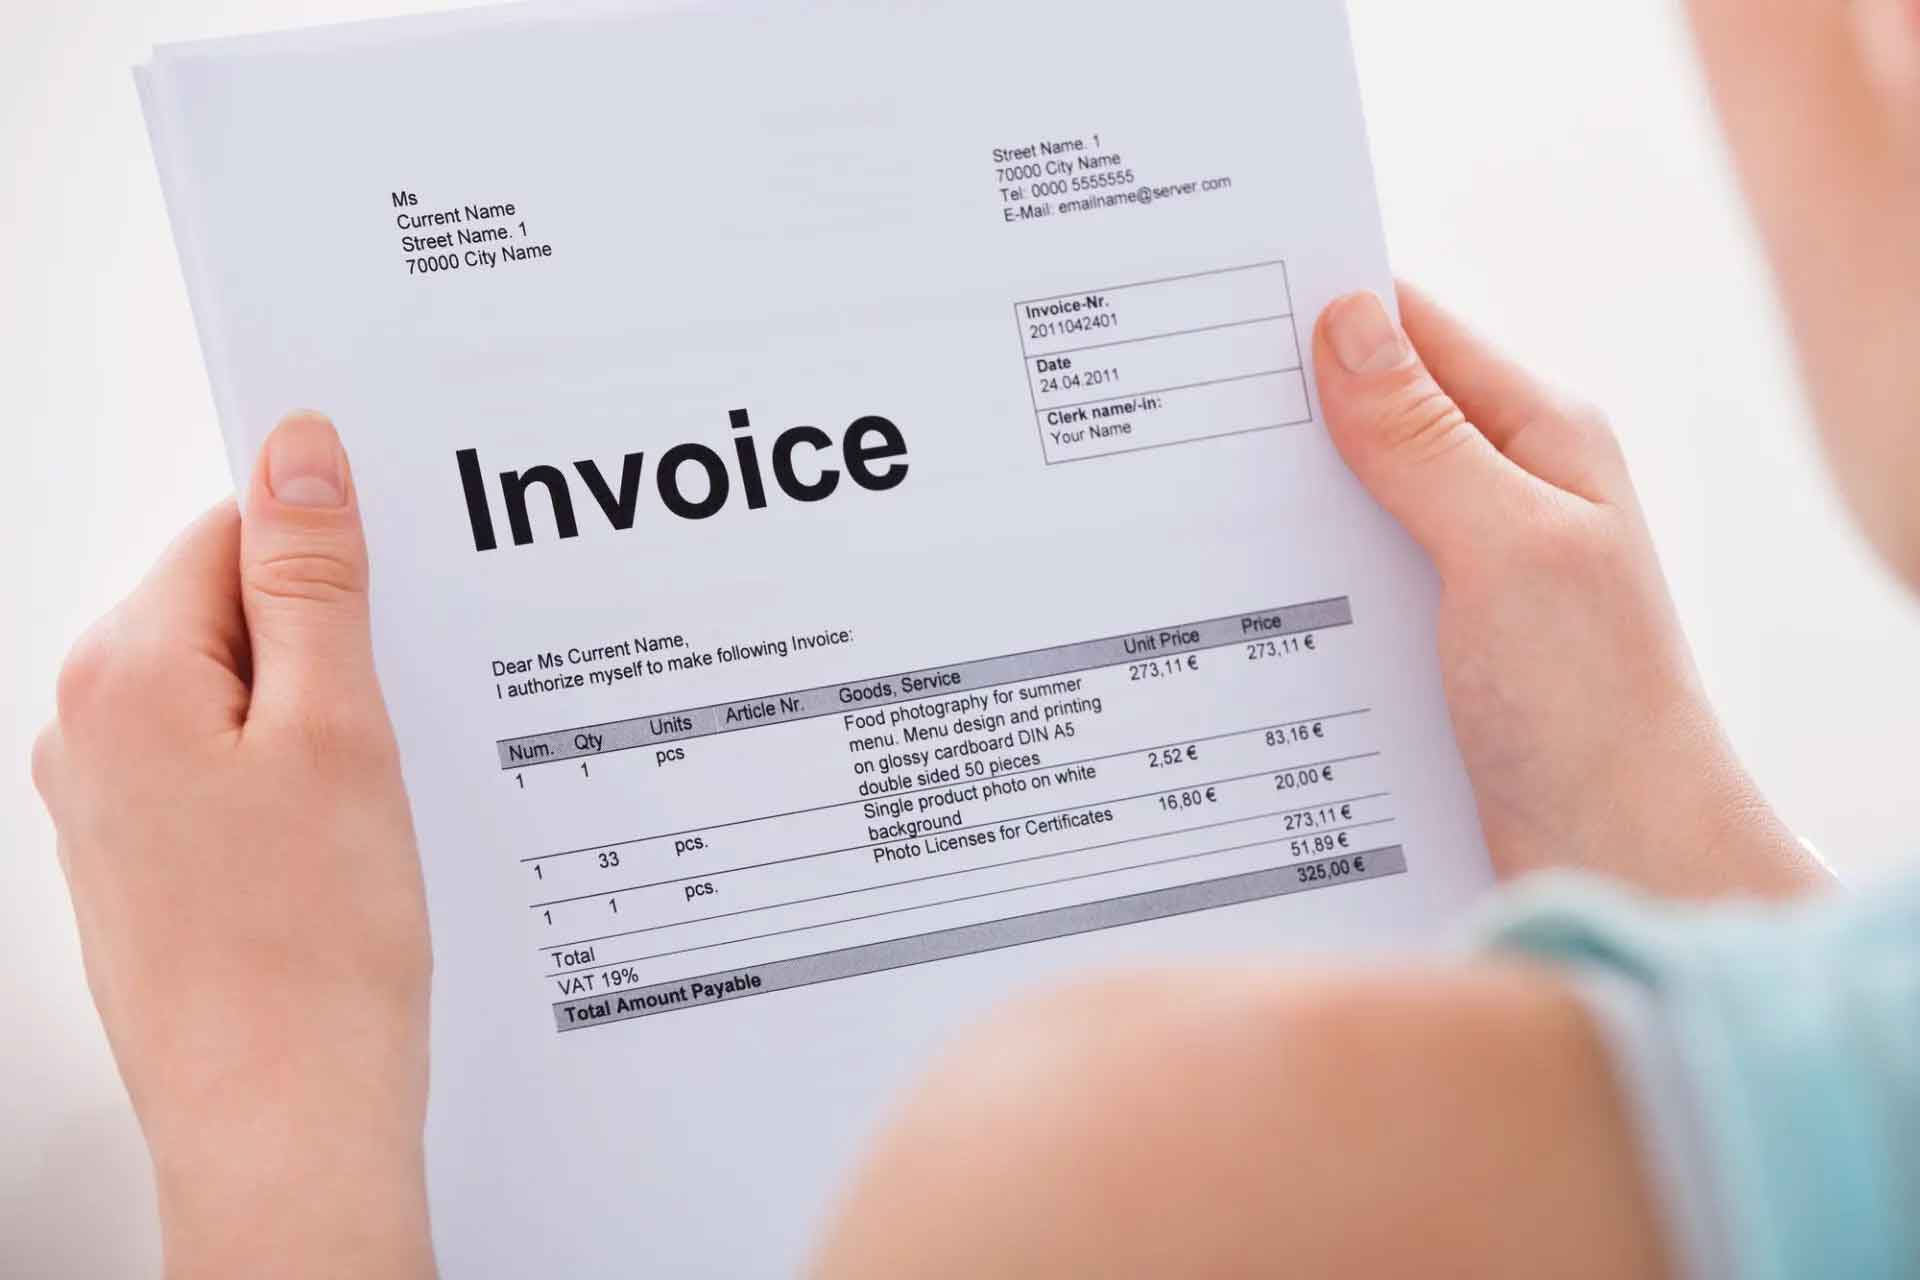 How To Pay An Invoice With A Credit Card